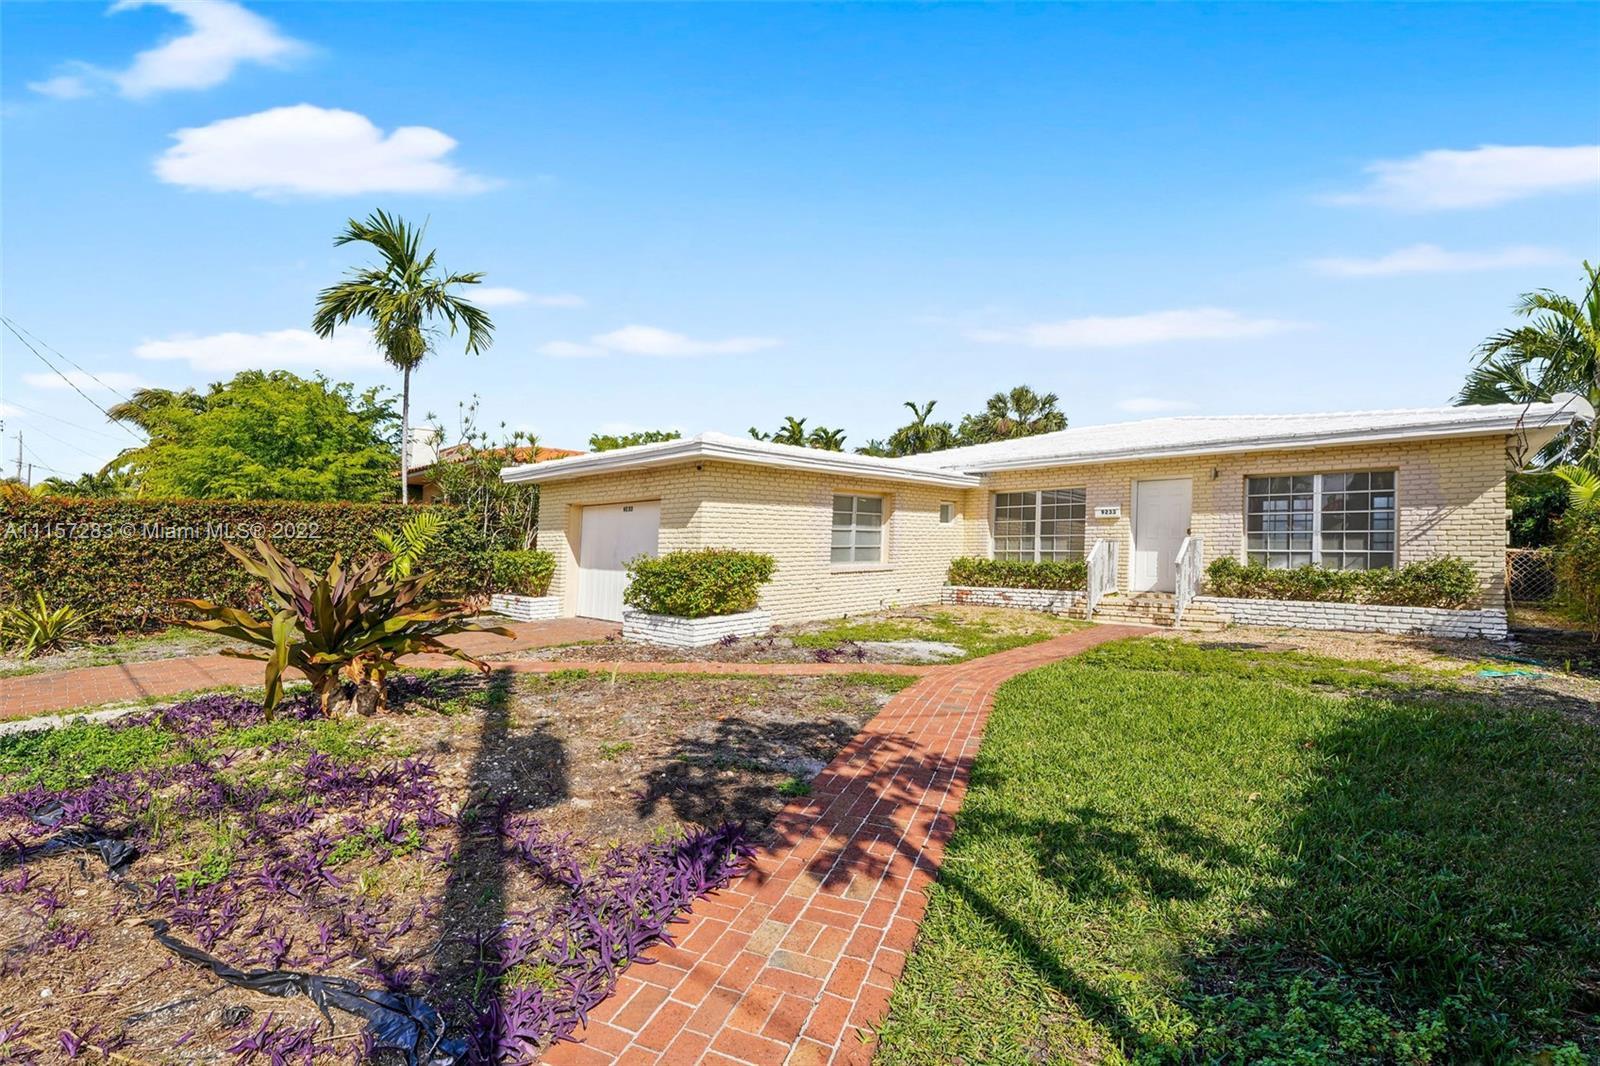 REDUCED!!!Looking for your forever home? Welcome to Surfside, one of the most sought after locations